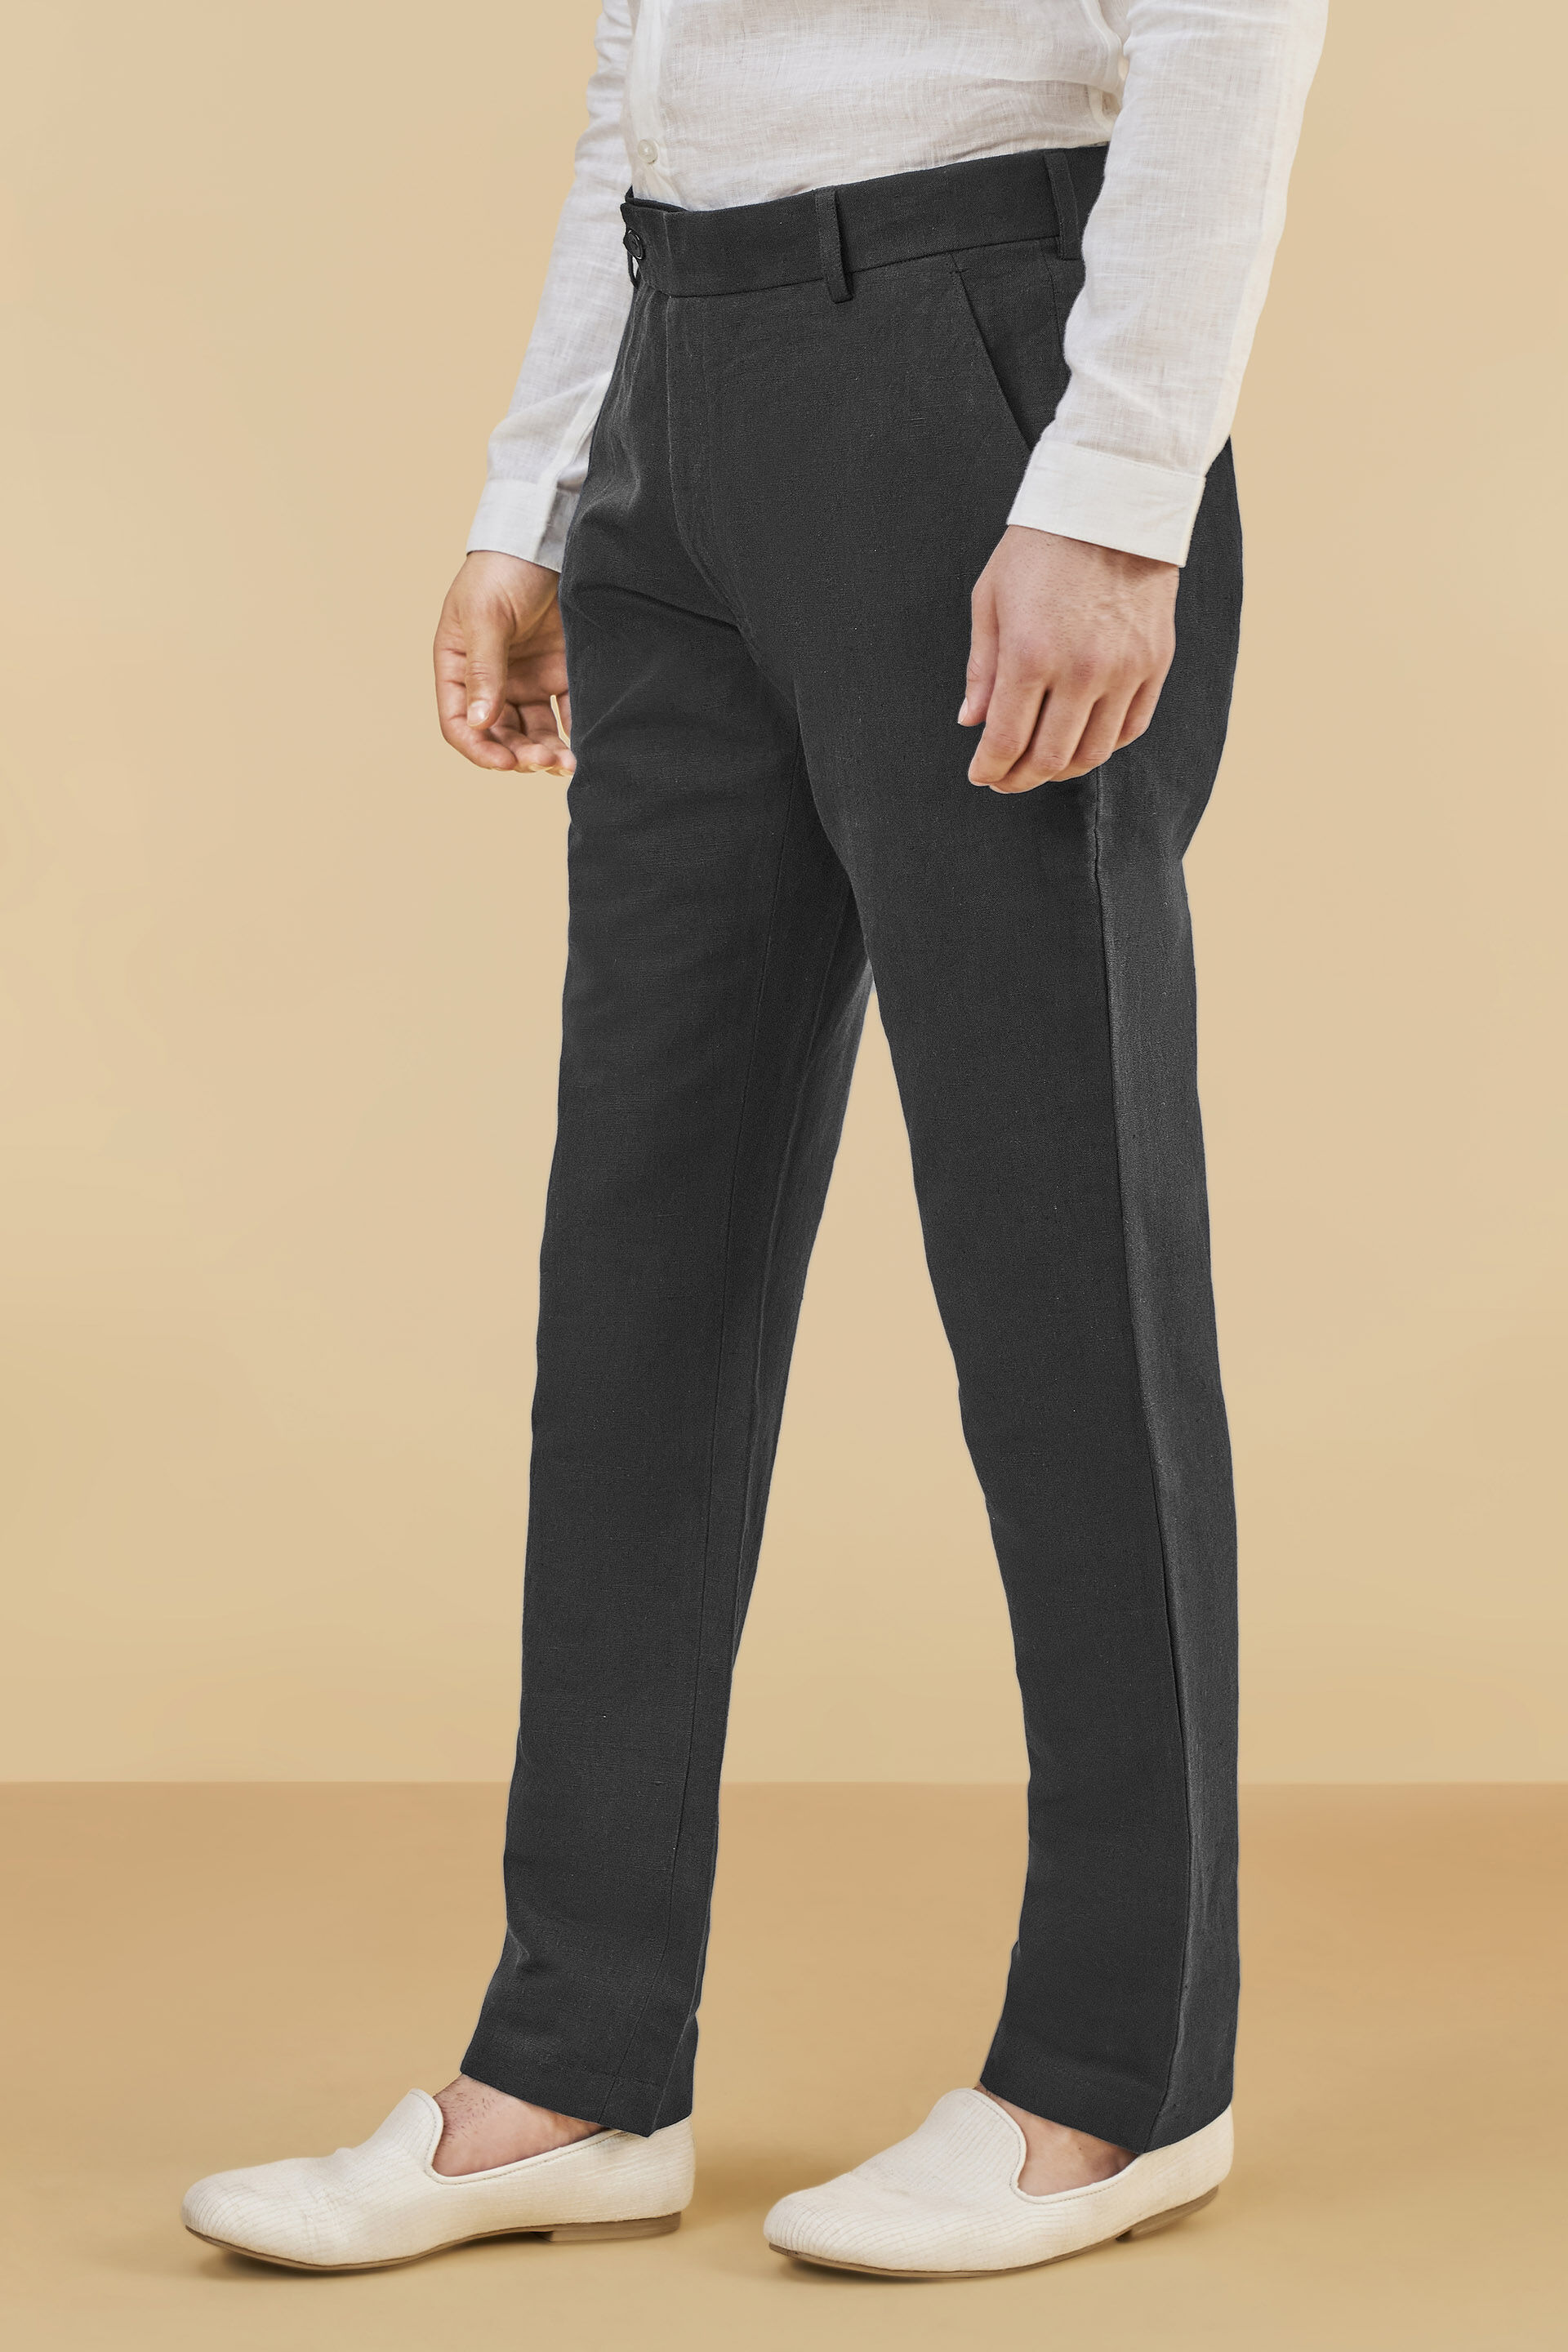 Buy Black Trousers Mens & Mens High Waisted Trousers - Apella